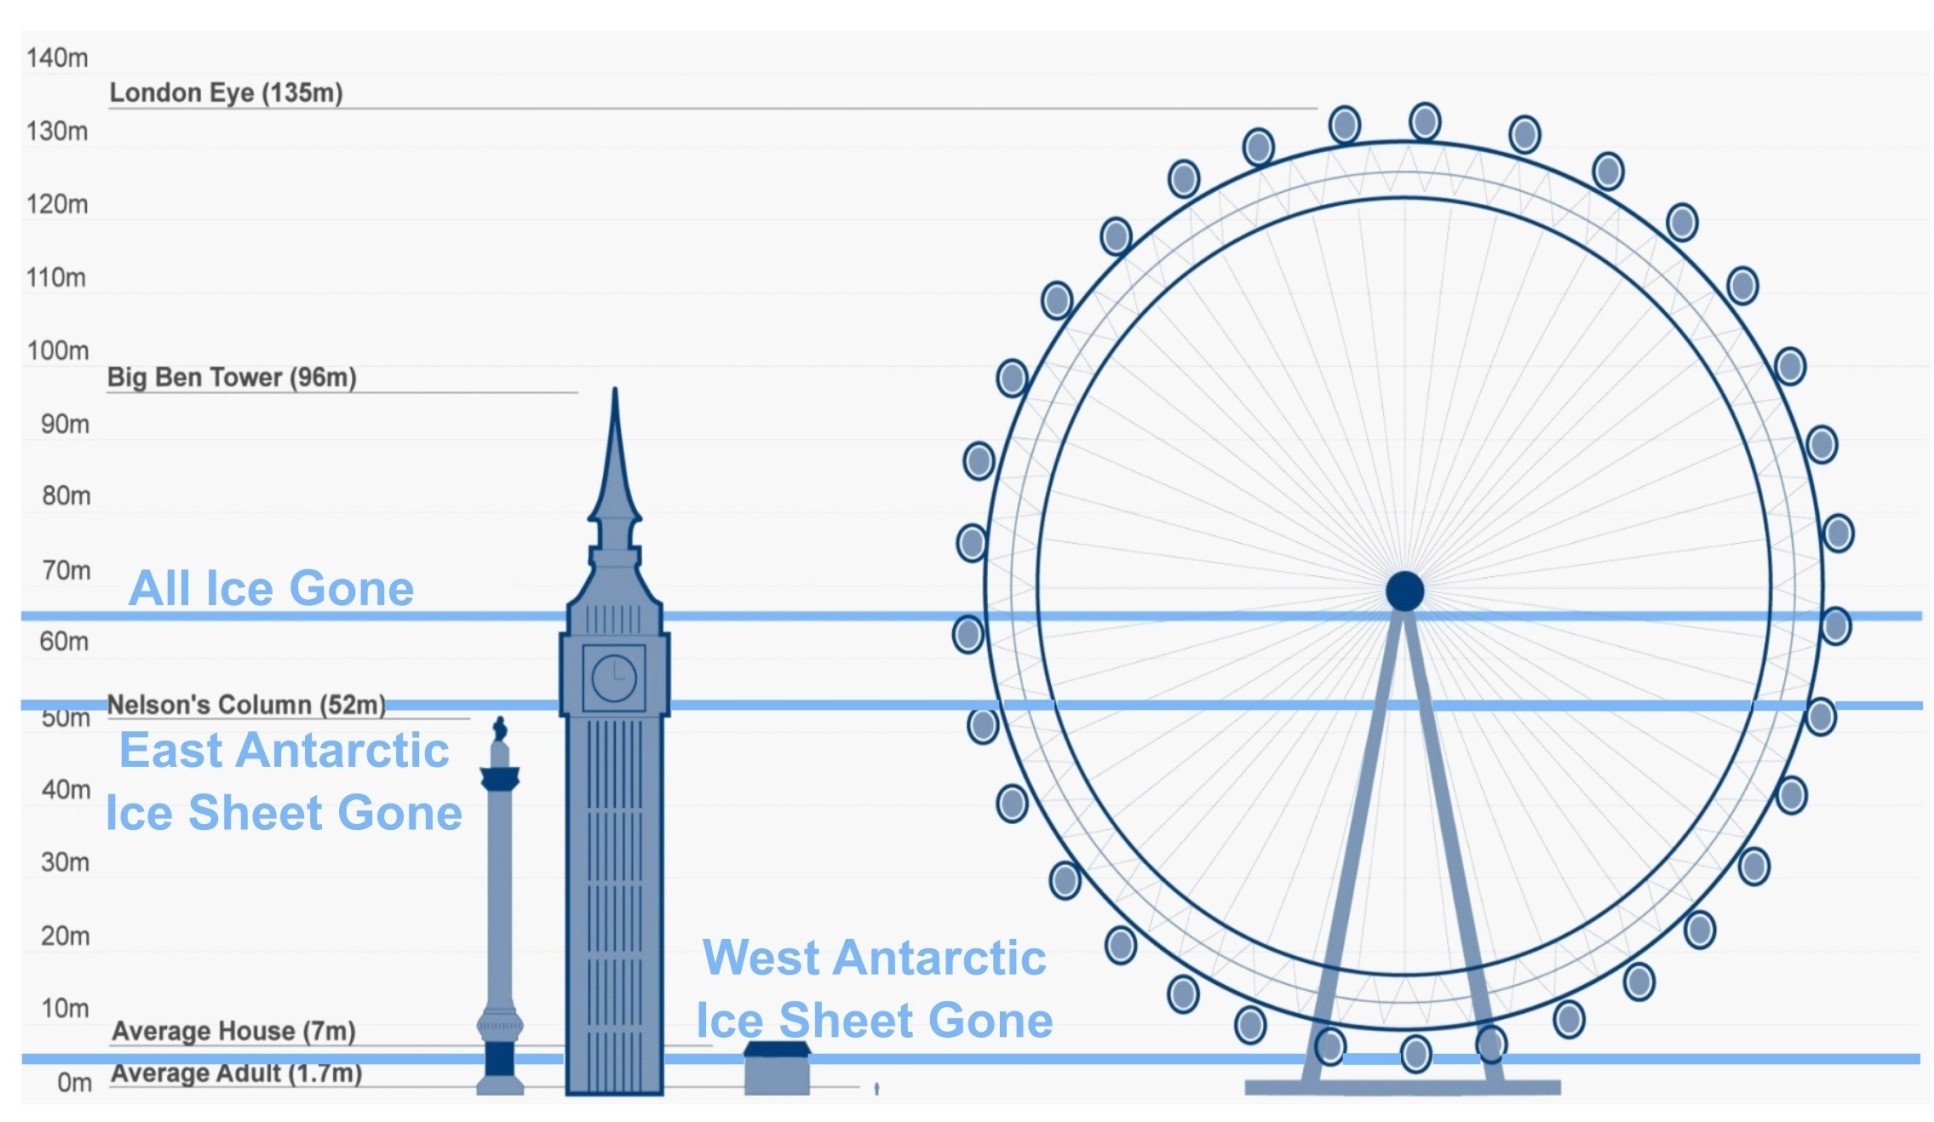 An illustration showing the height sea-level could rise under different amounts of ice lost compared to the height of famous London landmarks